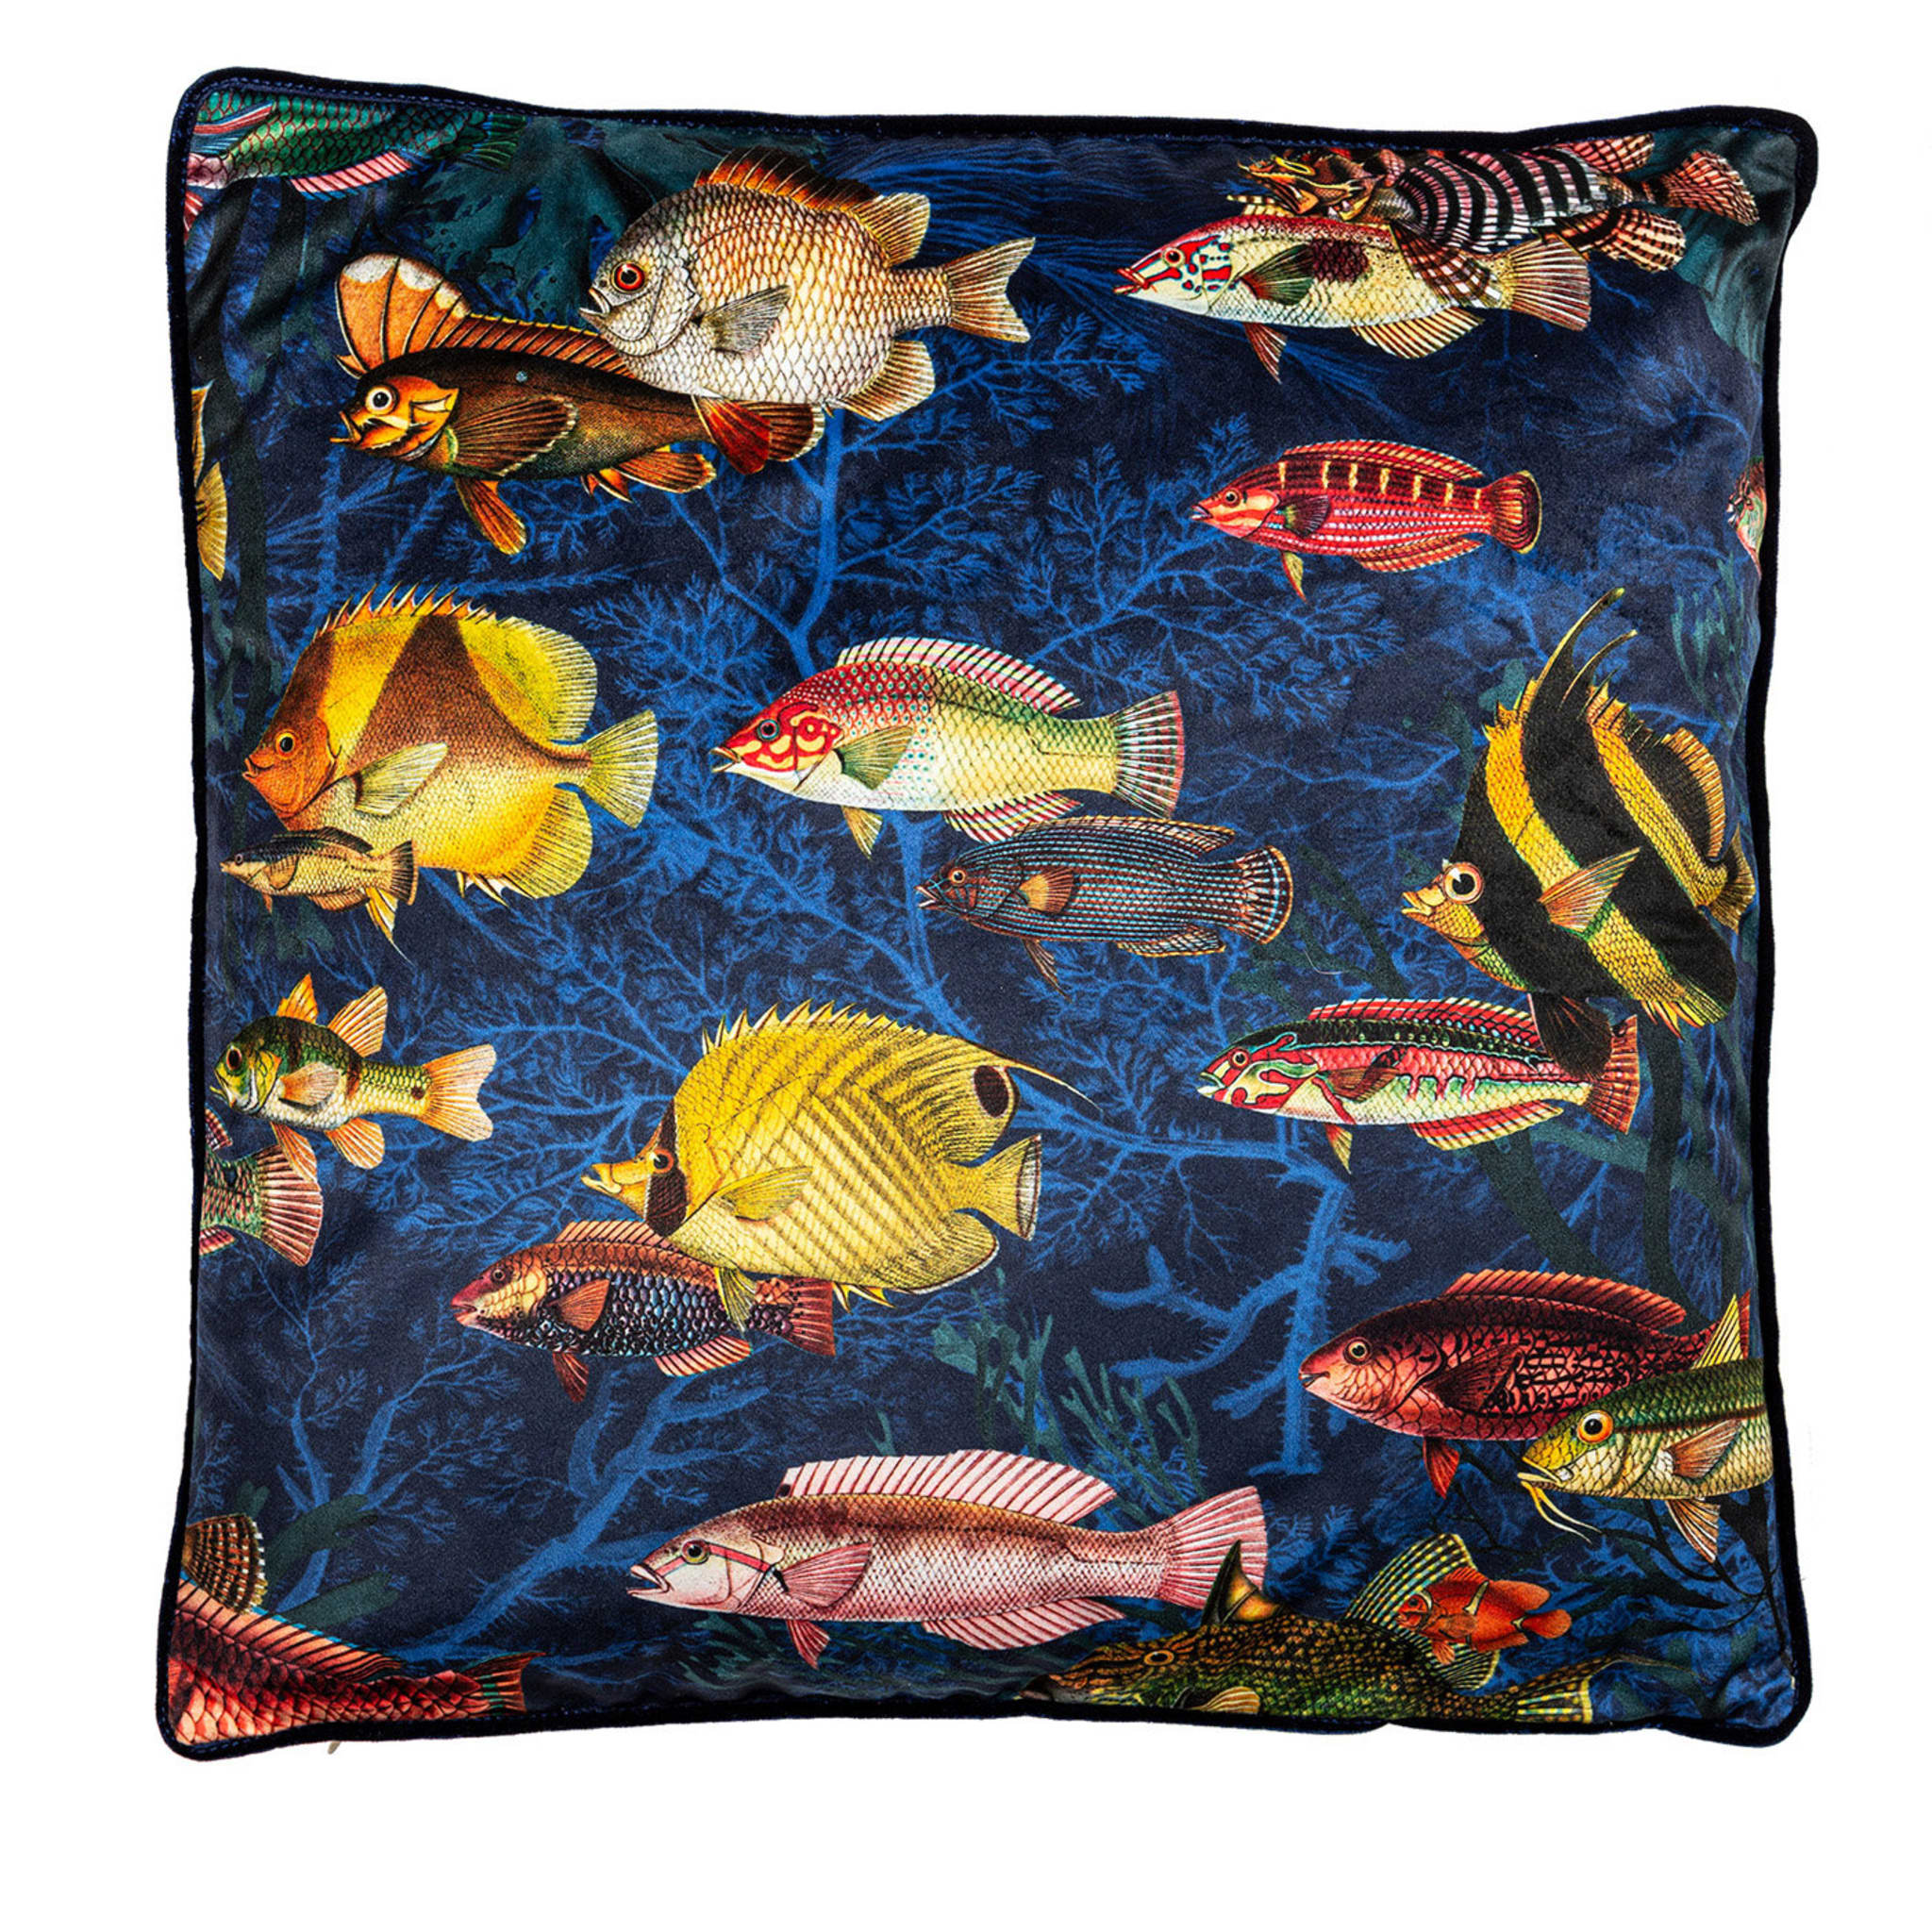 Amami Islands Velvet Cushion With Tropical Fish #4 - Main view